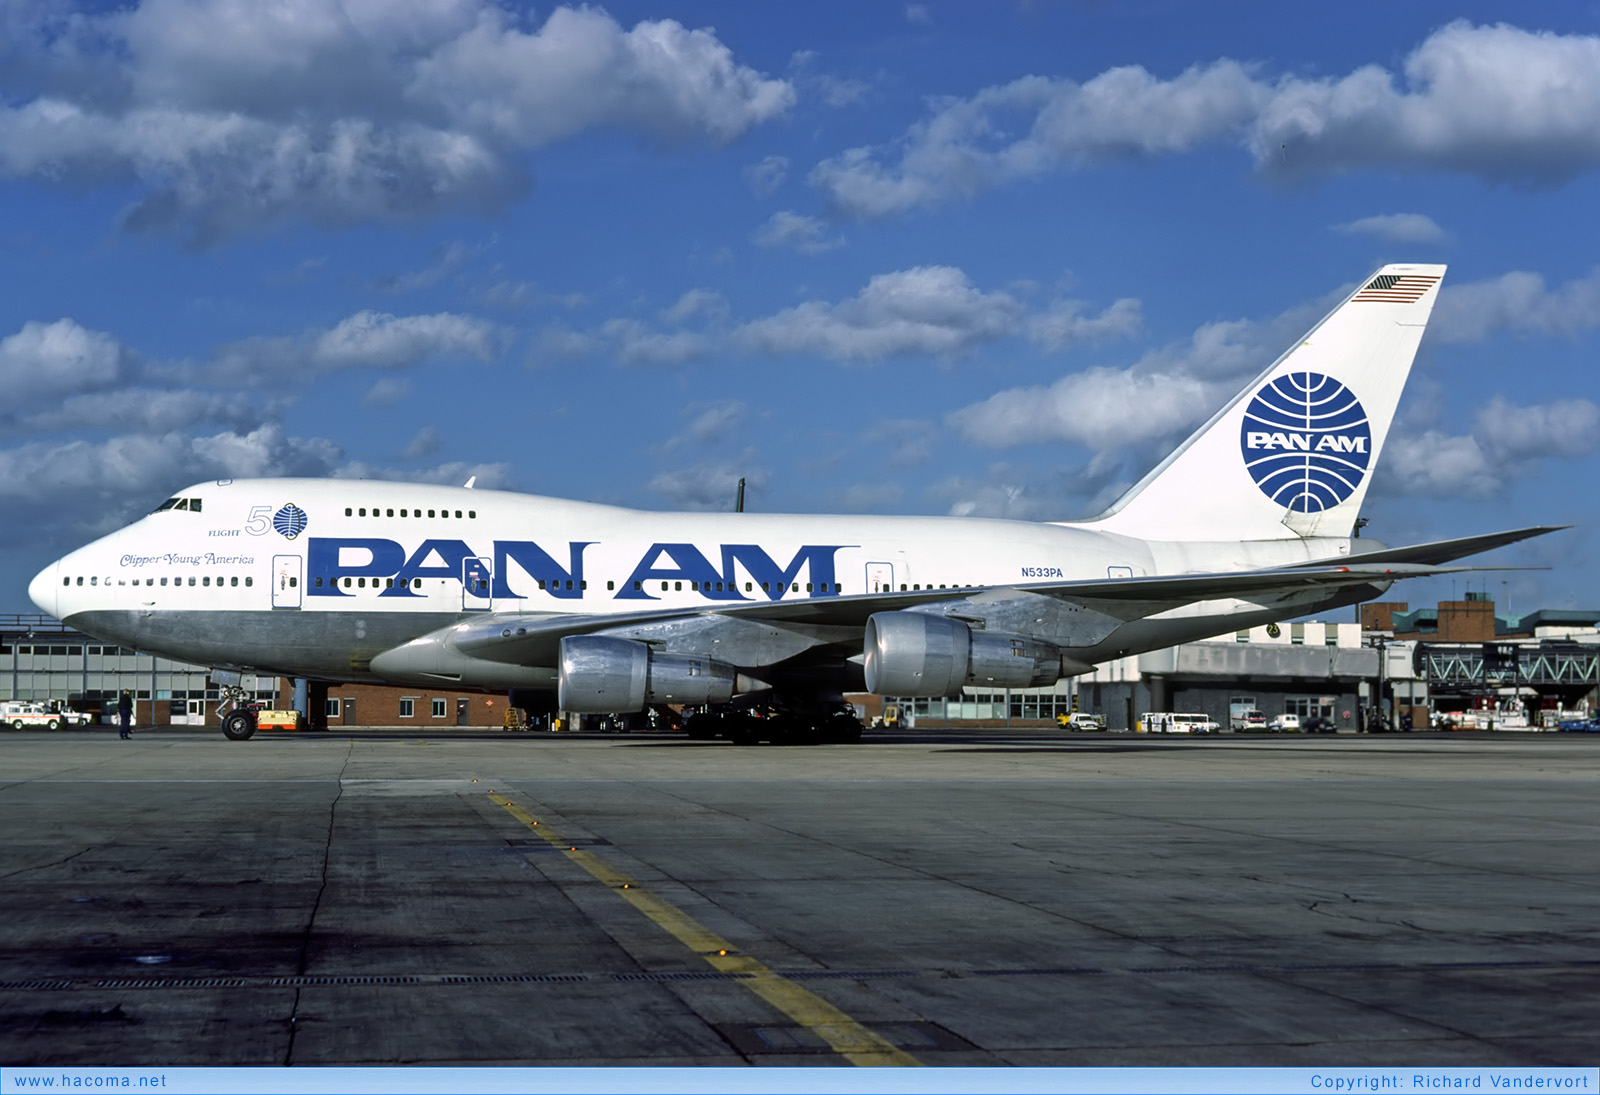 Foto von N533PA - Pan Am Clipper Freedom / Liberty Bell / New Horizons / Young America / San Francisco - London Heathrow Airport - 10.1985